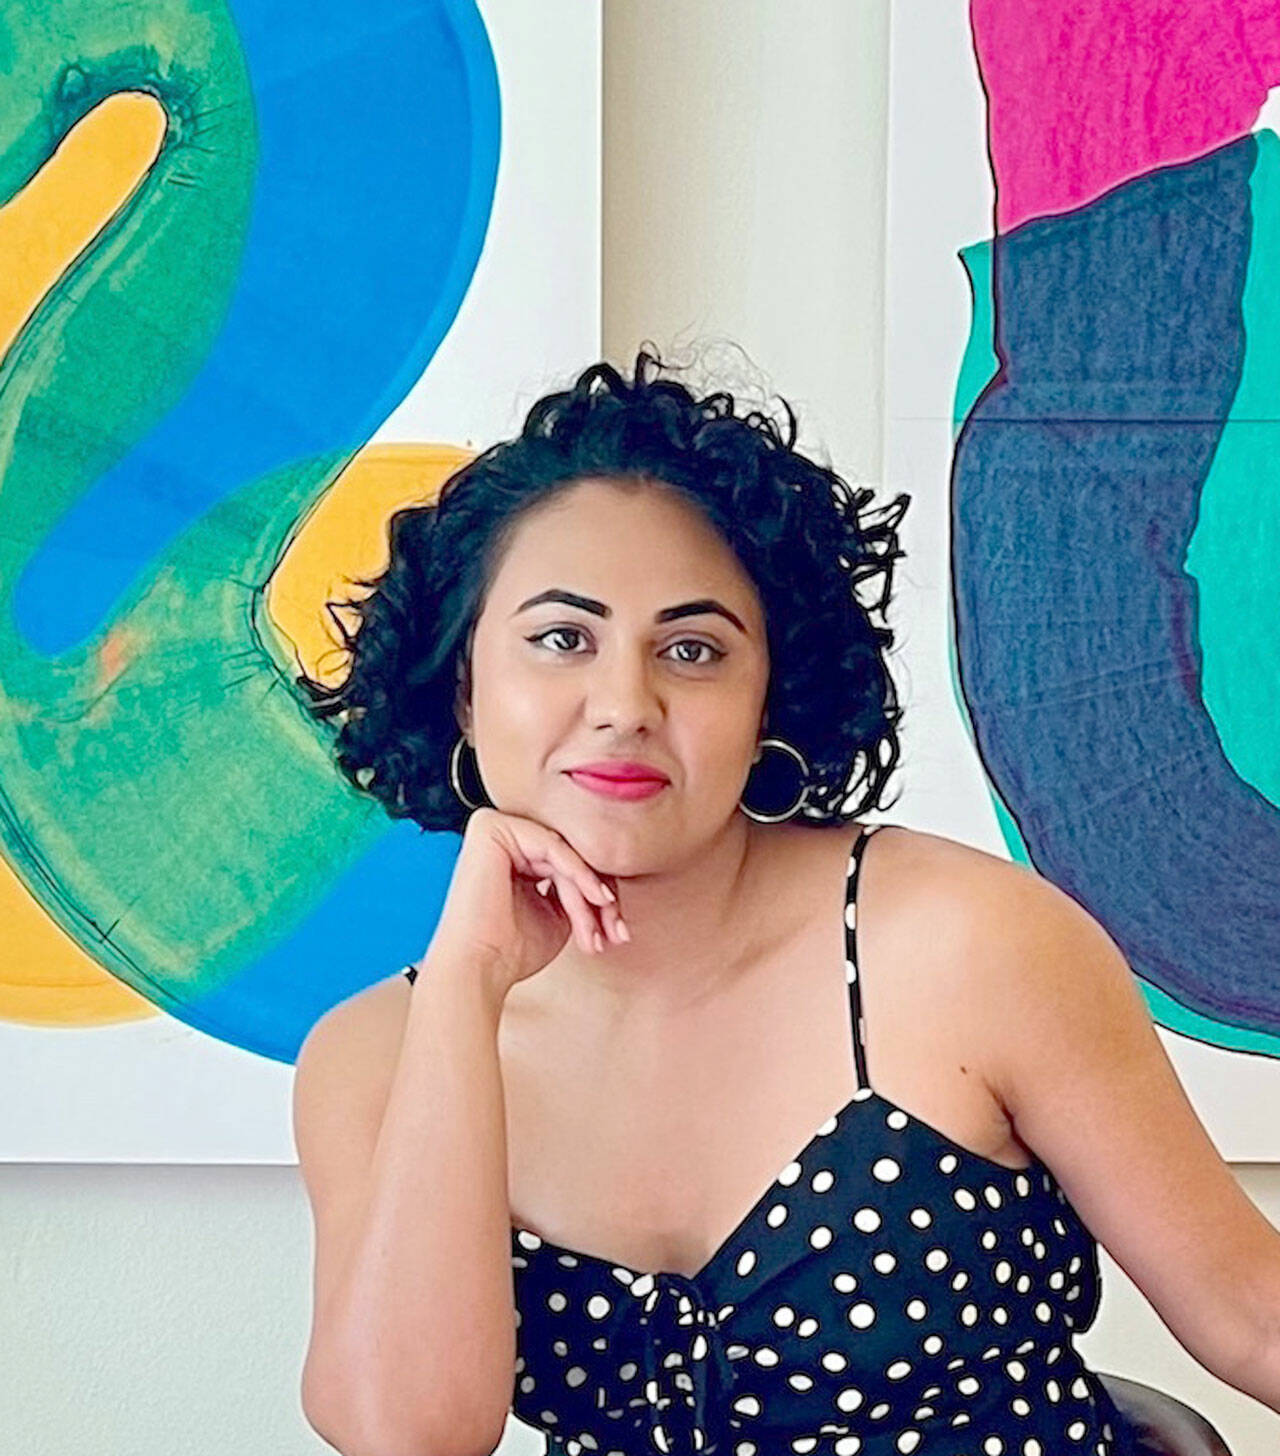 Neha Panicker is one of three artists coming to Port Townsend for a public talk on Saturday.